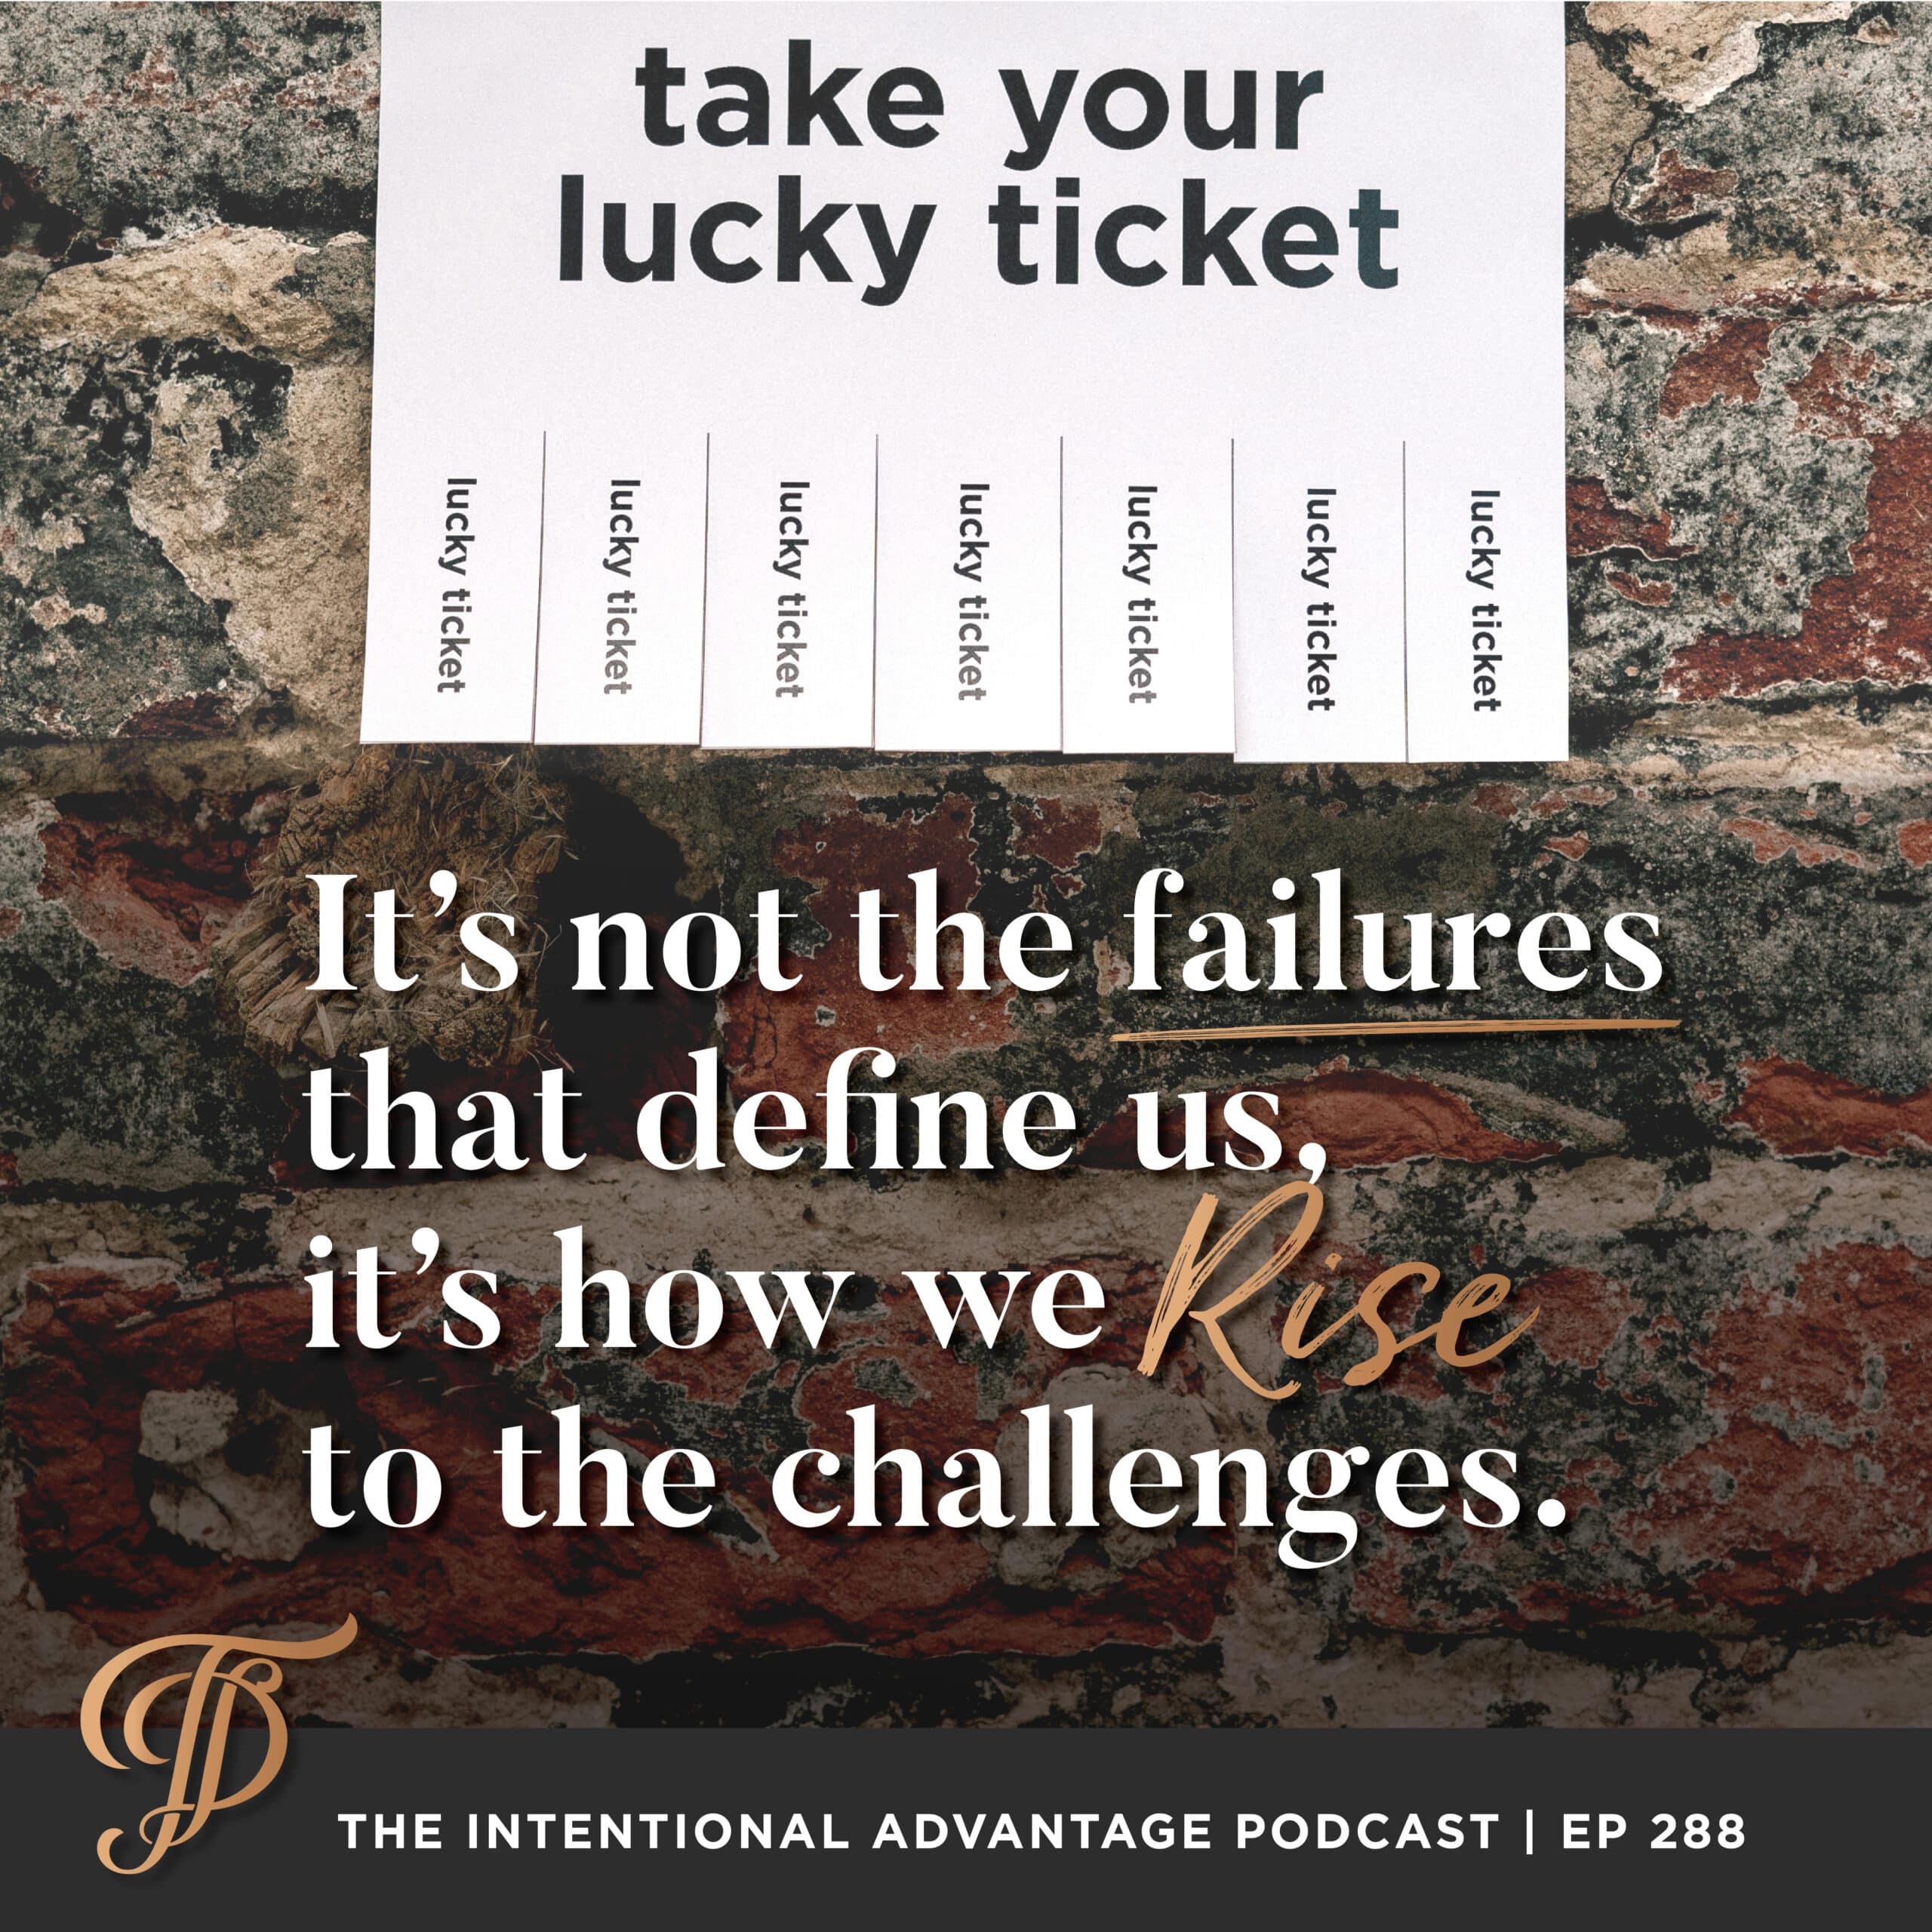 Tanya Dalton talks with Laura Gassner Otting about Making Your own Luck on the Intentional Advantage Podcast